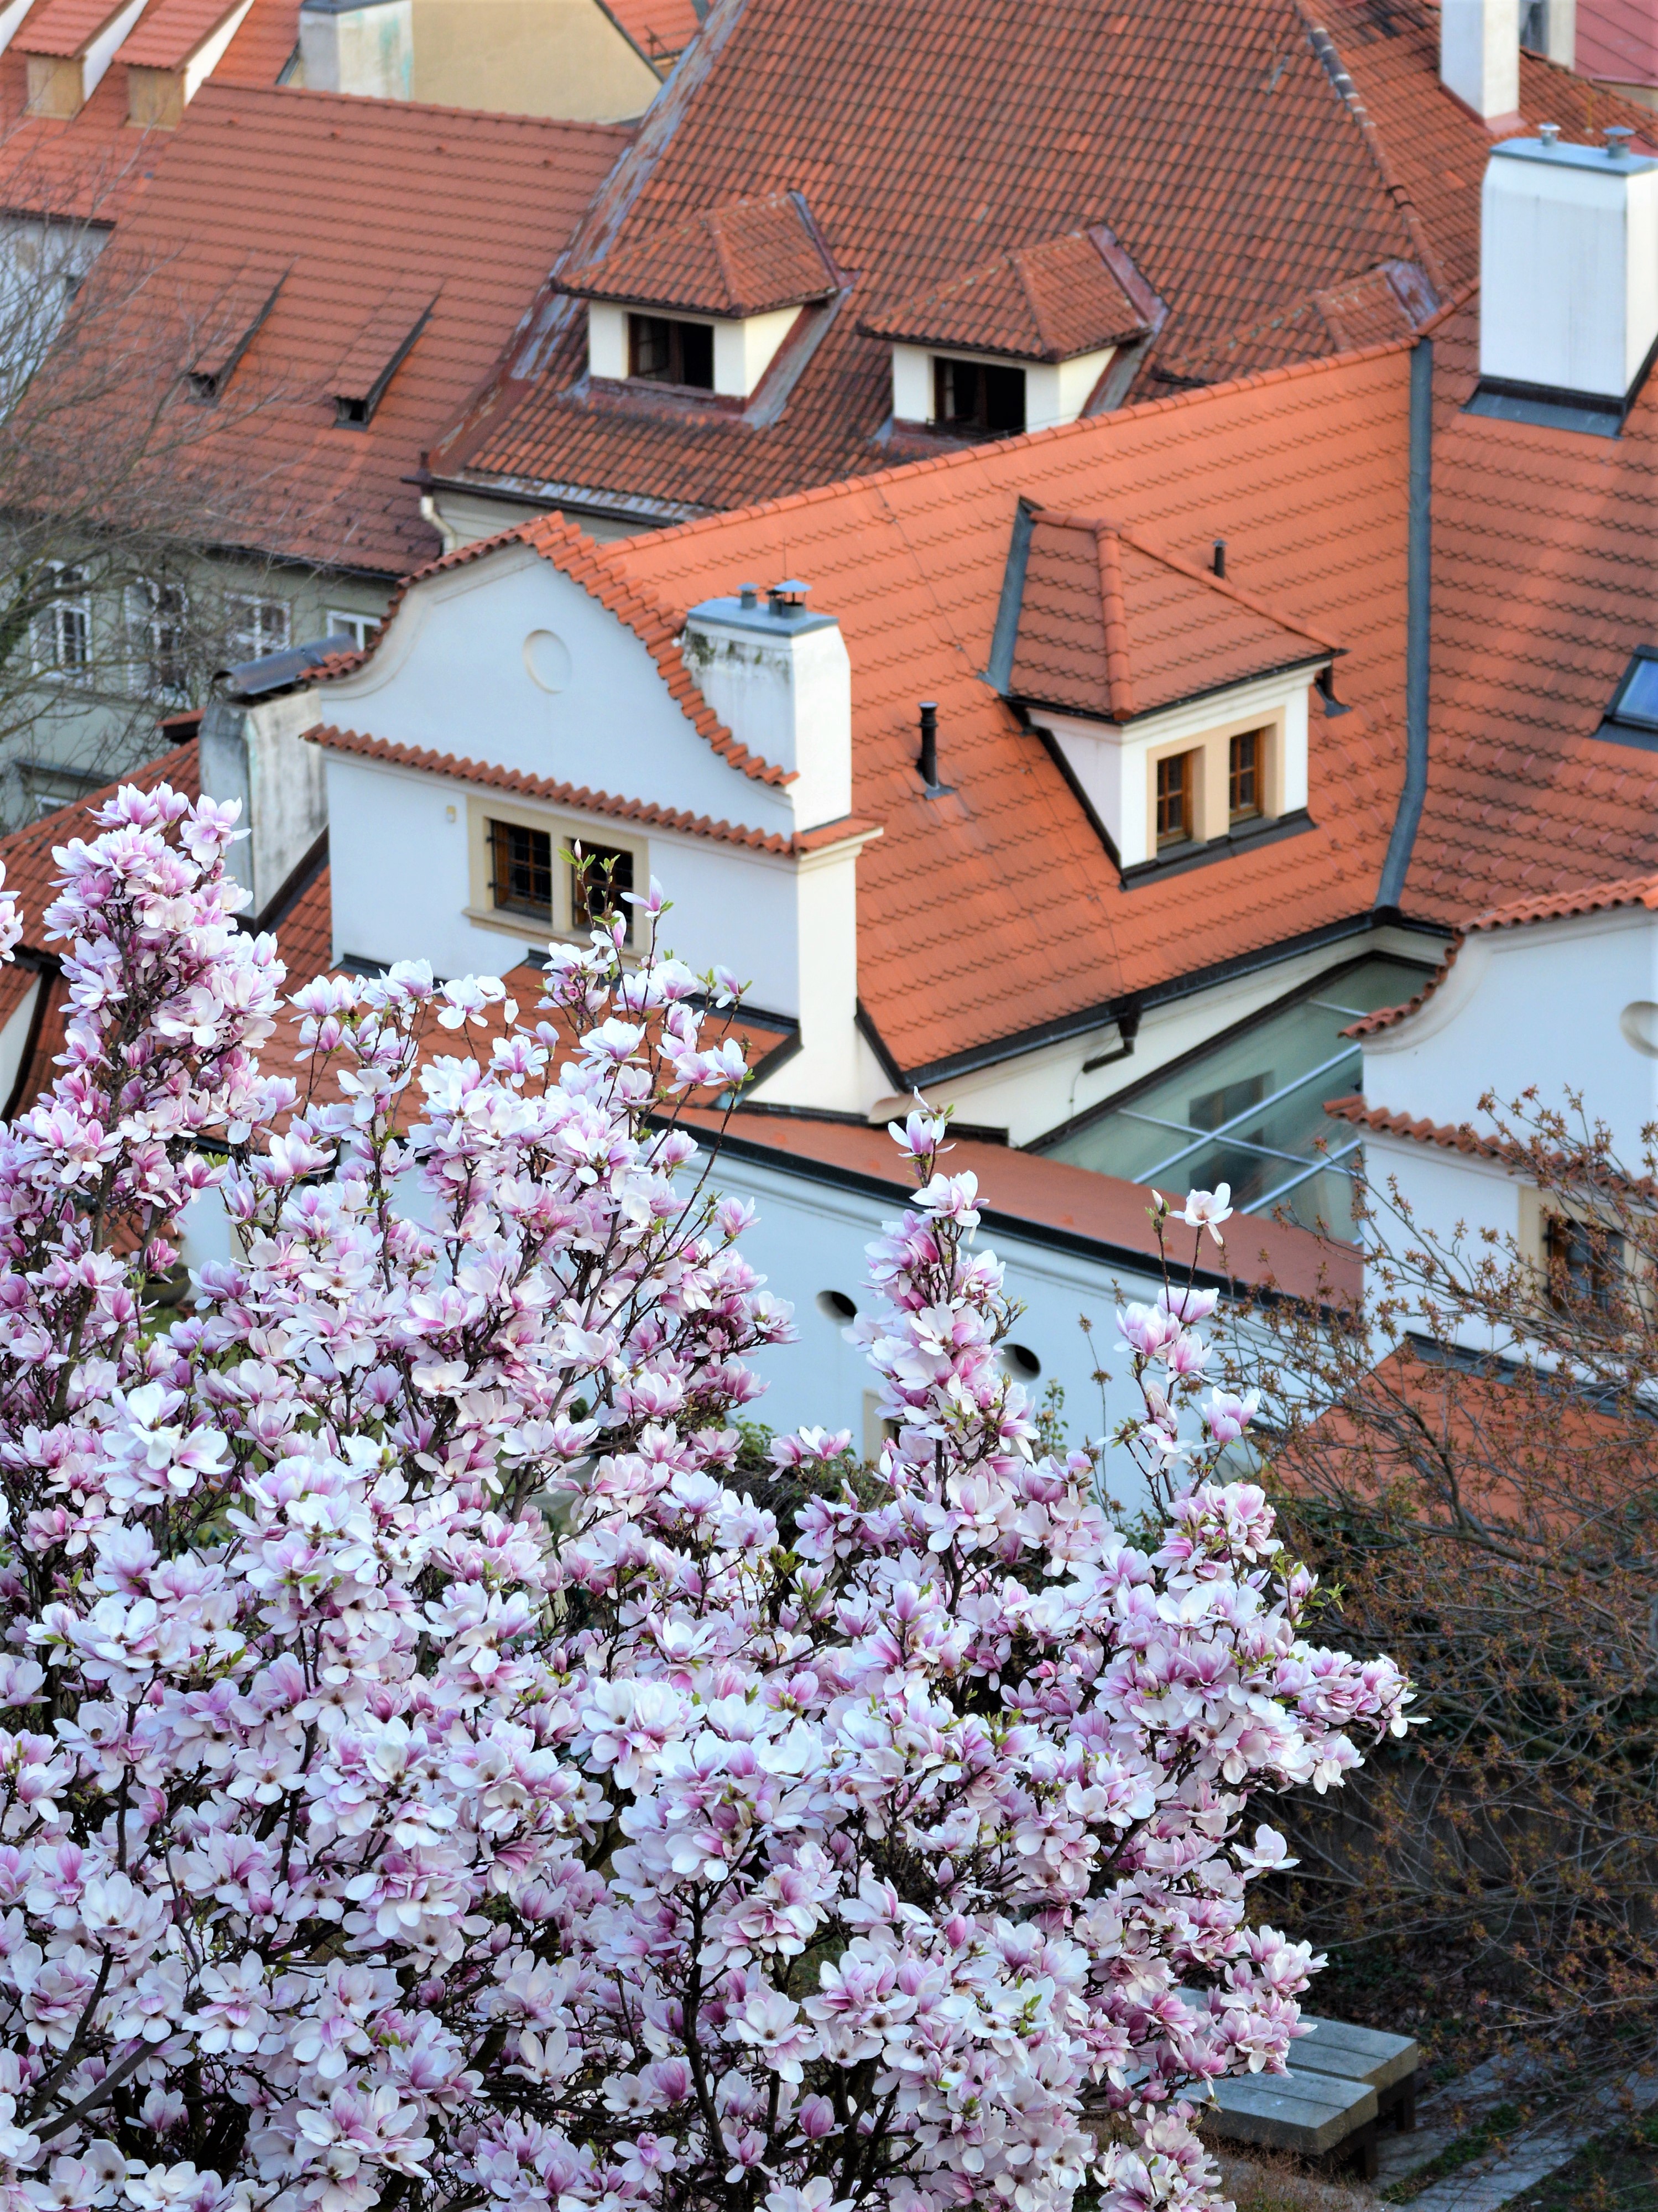 Prague in spring, with blossoming trees